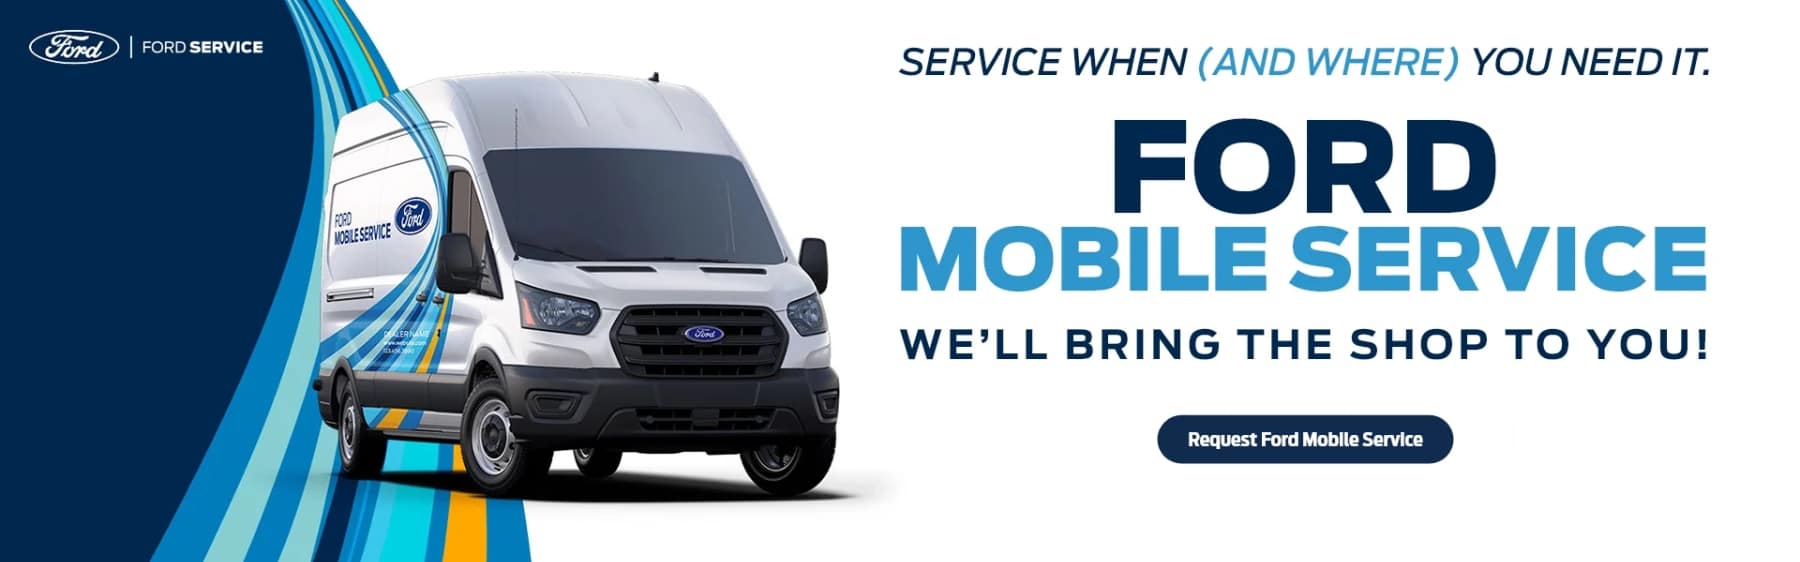 Ford Mobile Service Banner